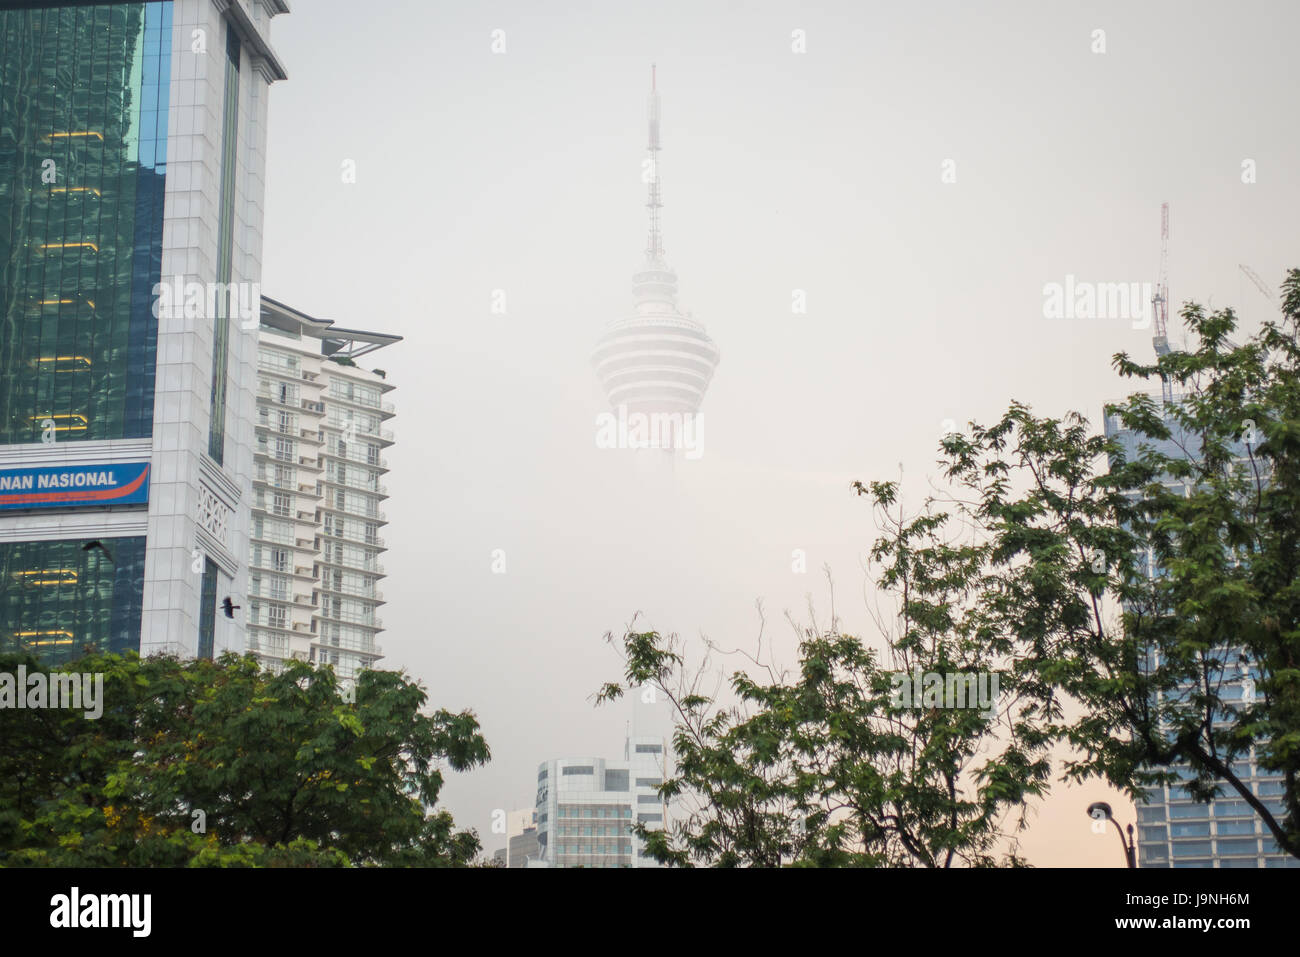 The KL Tower was basically disappearing in the waning light of day. Stock Photo